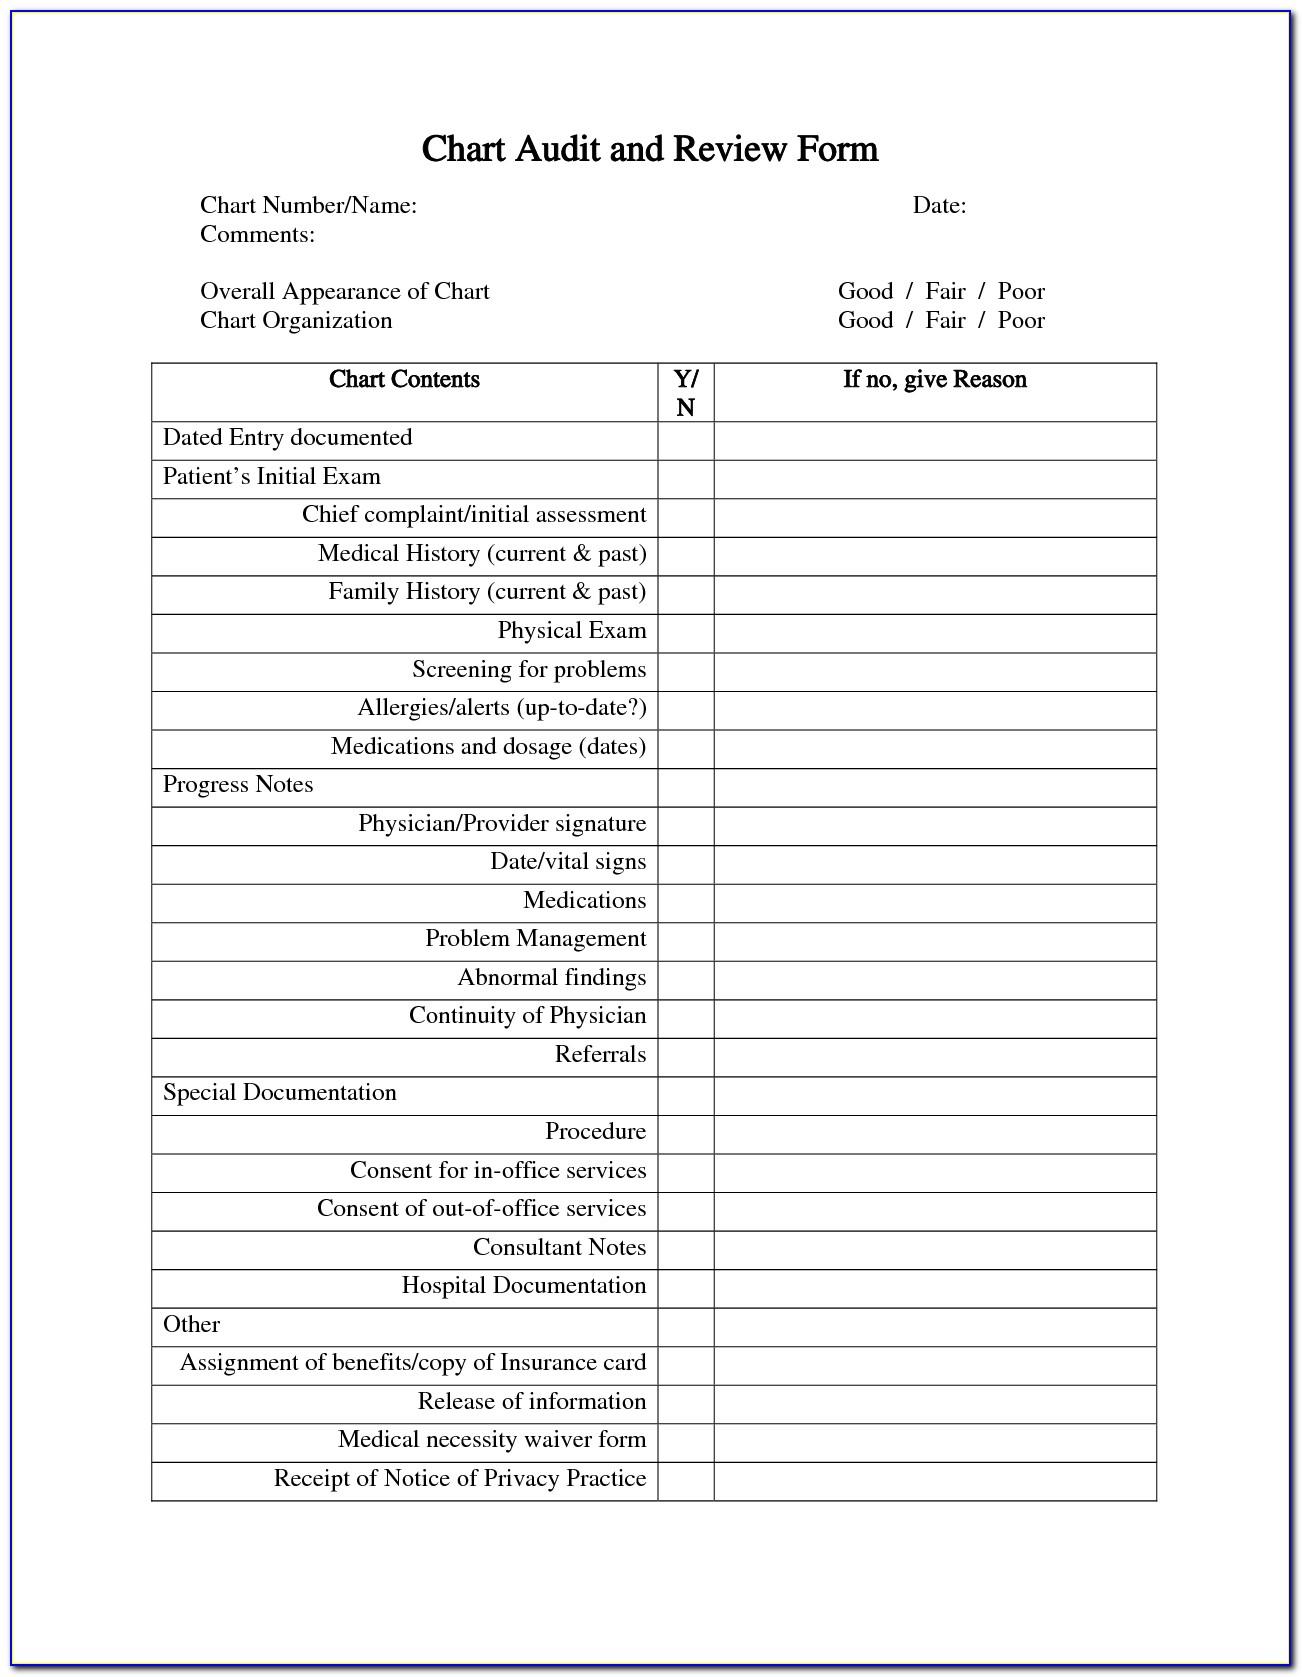 Sample Medical Chart Peer Review Evaluation Form